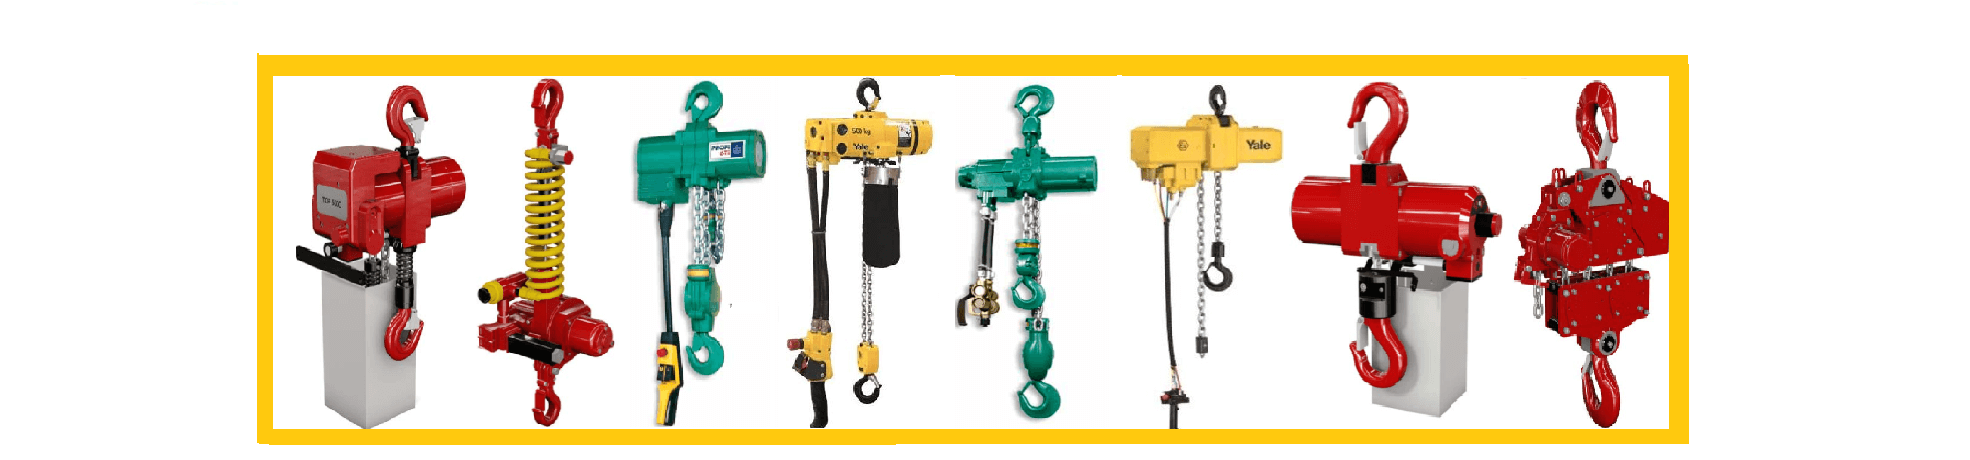 air hoist collection from Lifting Hoists direct